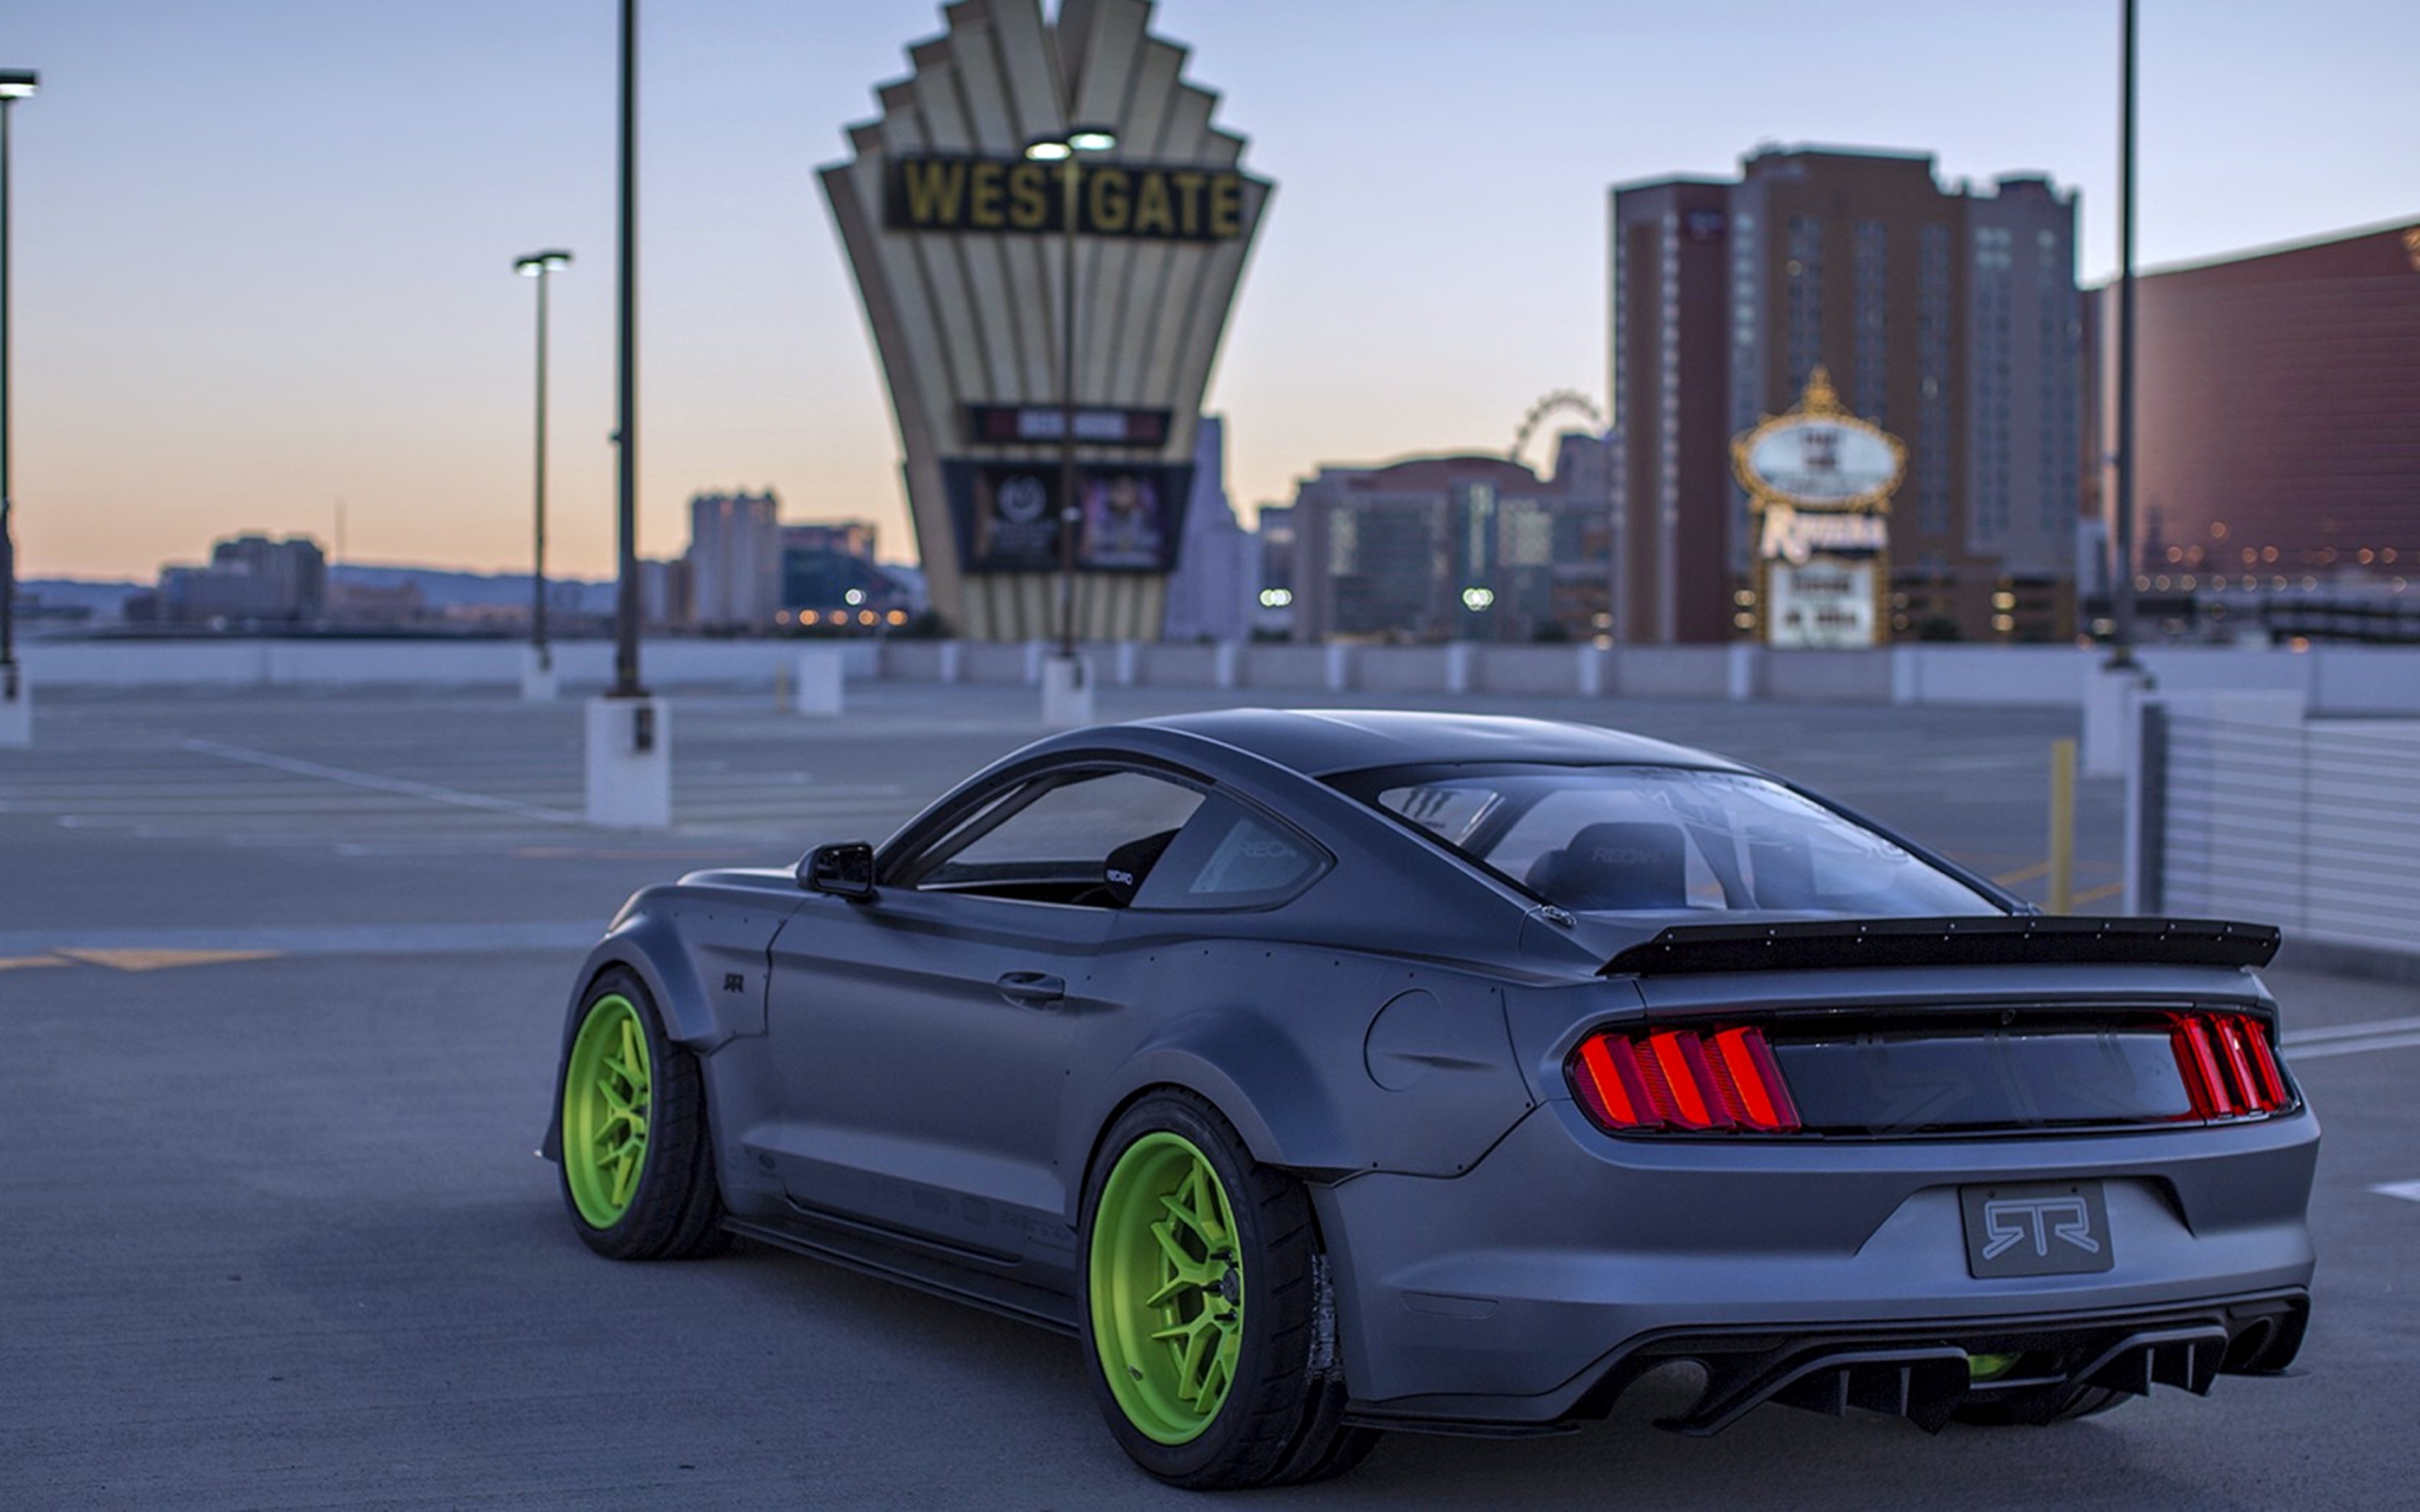 2014, Ford, Mustang, Rtr, Spec 5, Gray, Speed, Motors, Supercars, Cars, City Wallpaper